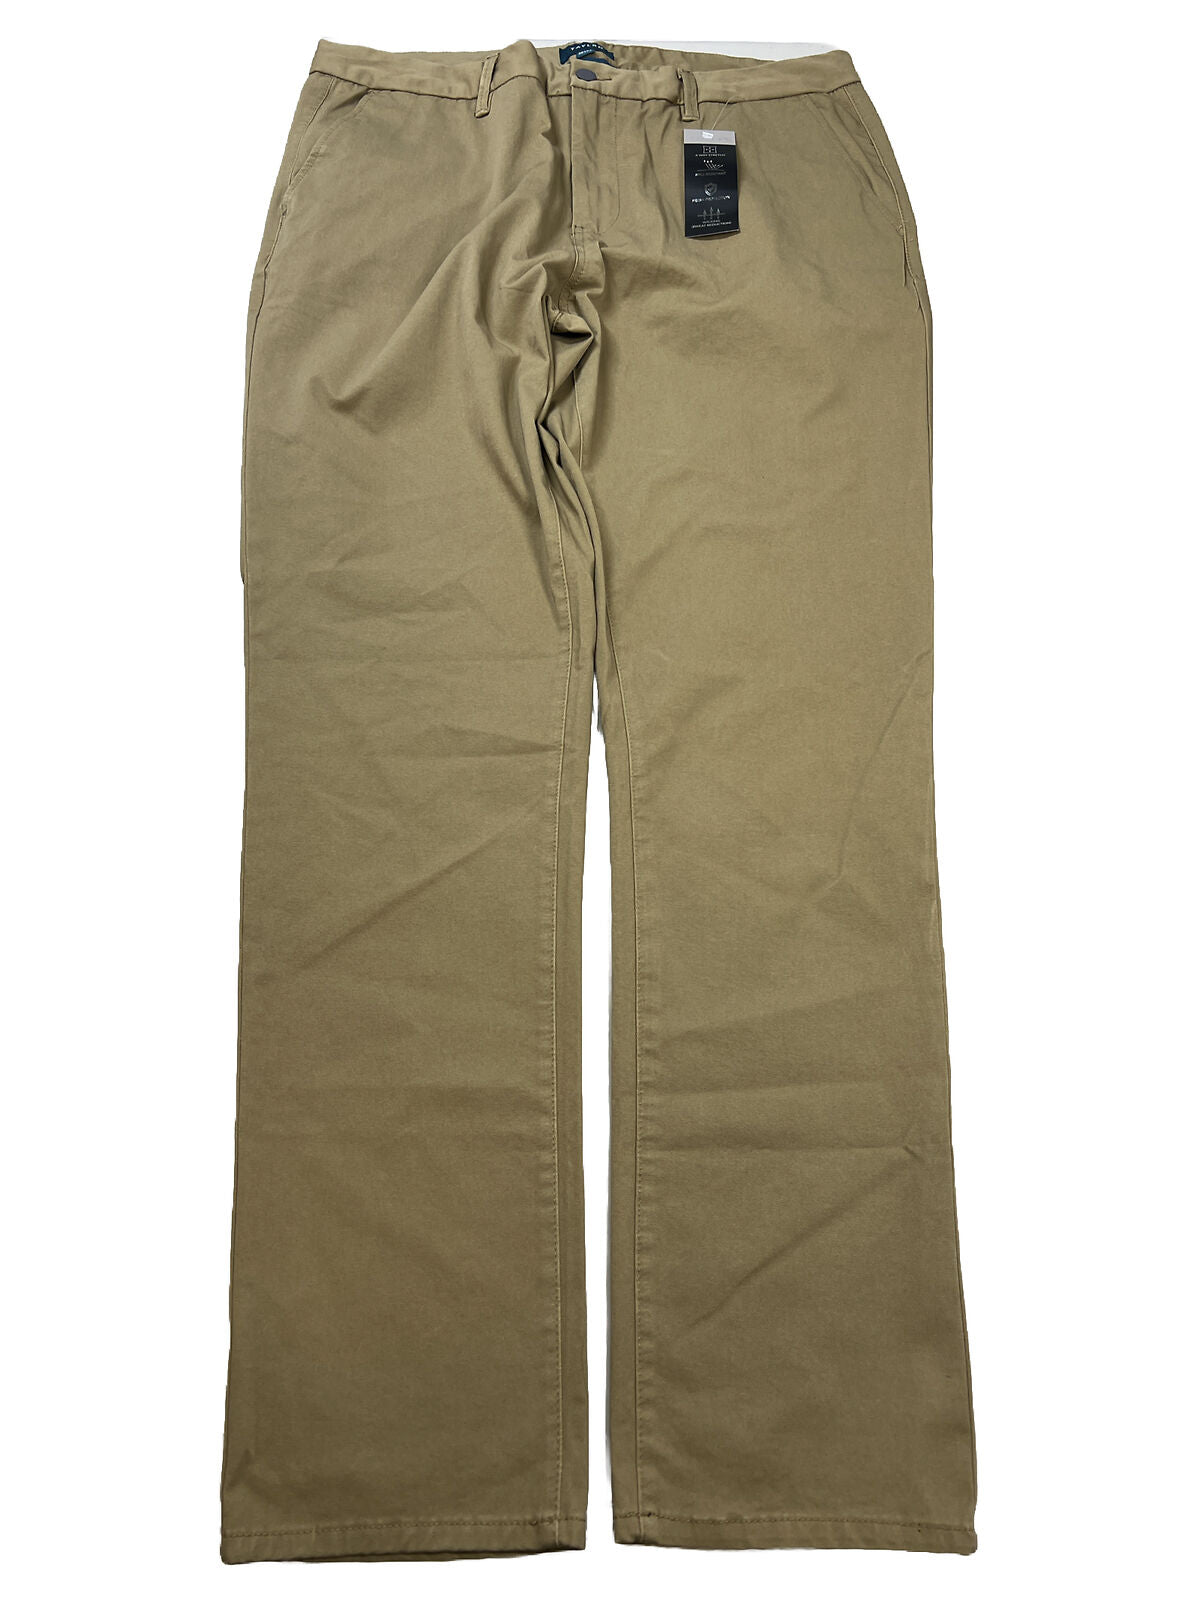 NEW Taylrd Men's Beige 4-Way Stretch Chino Pants - 38x34 – The Resell Club